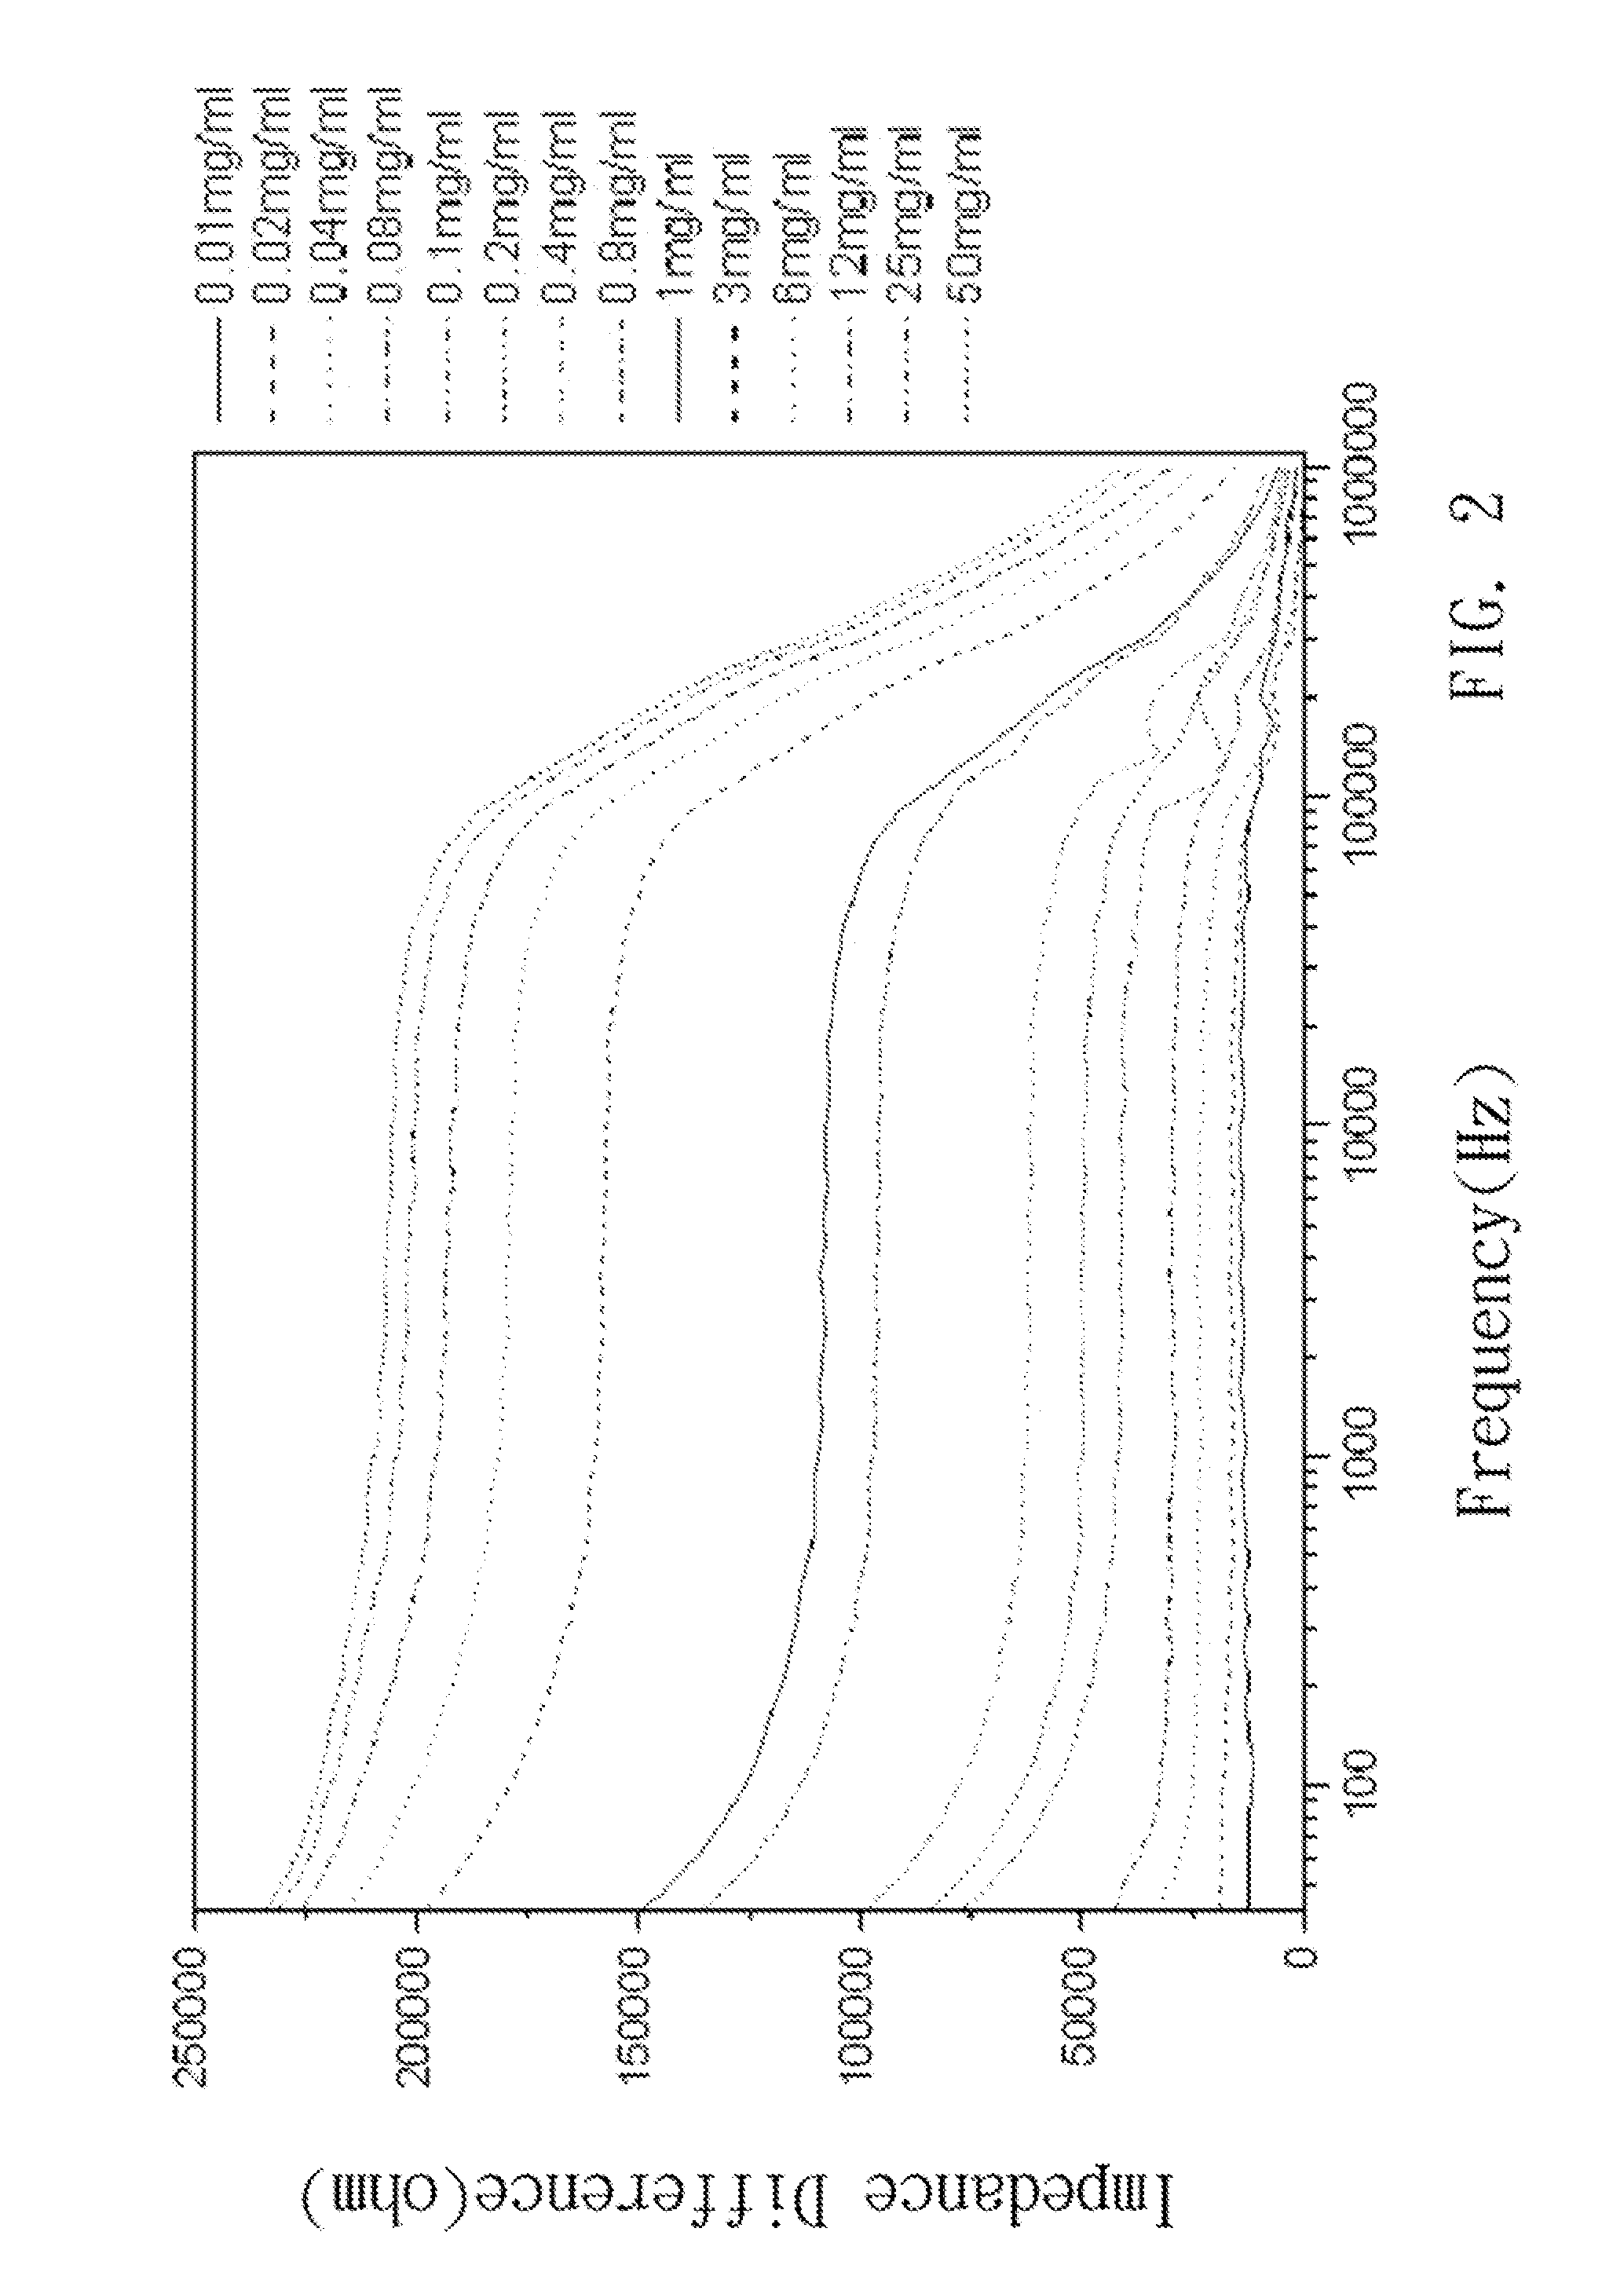 Method of measuring glycosylated protein proportion by ac impedance method